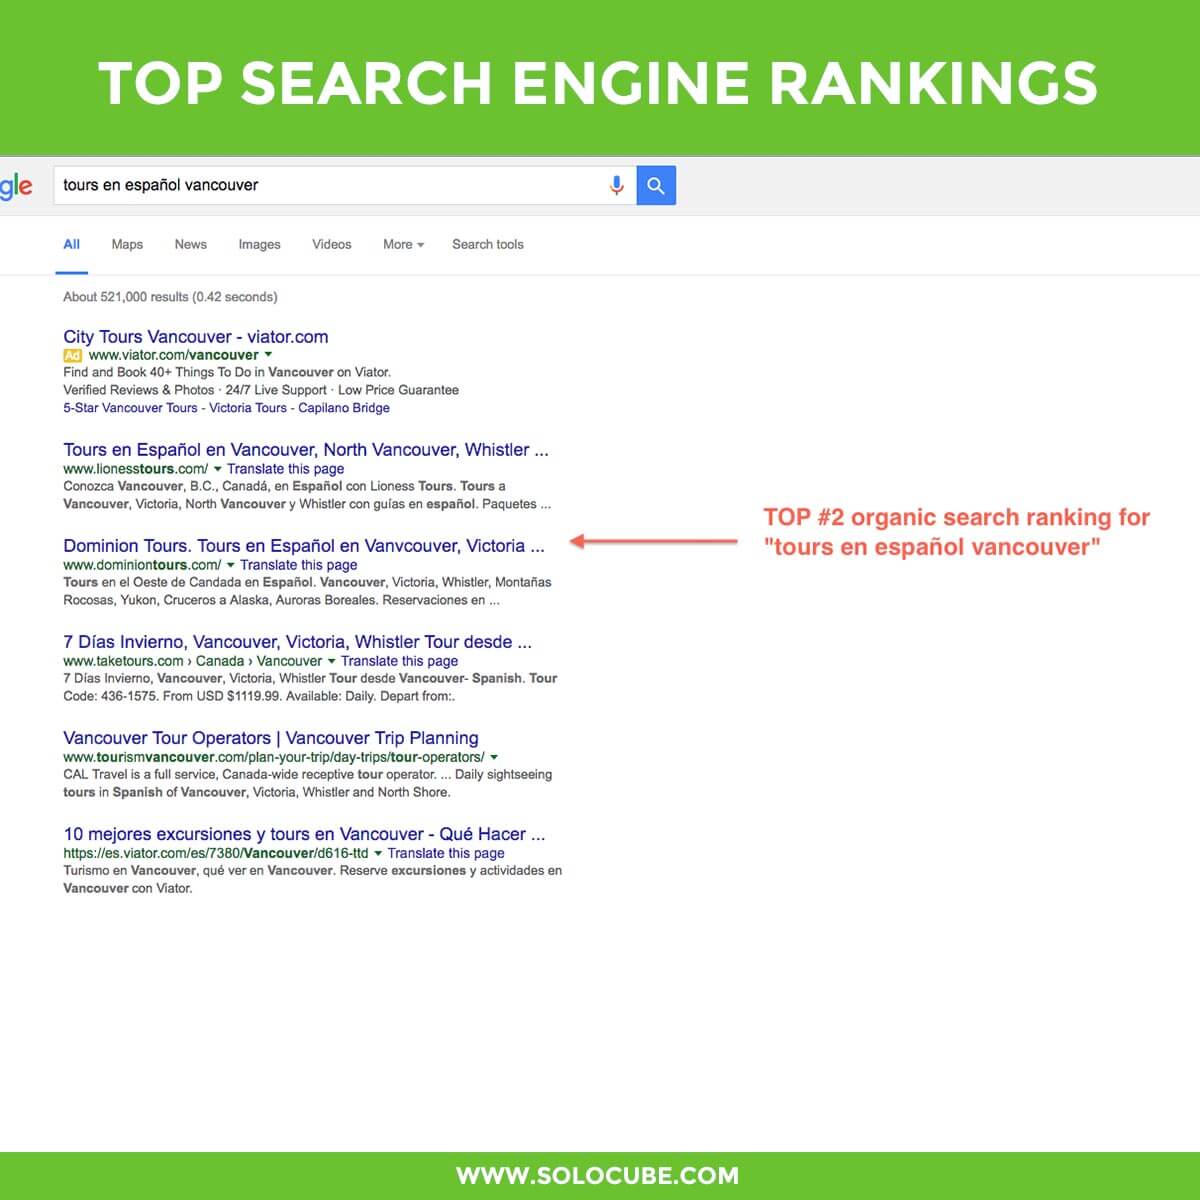 top SEO google ranking by solocube 08 - Chiropractor SEO